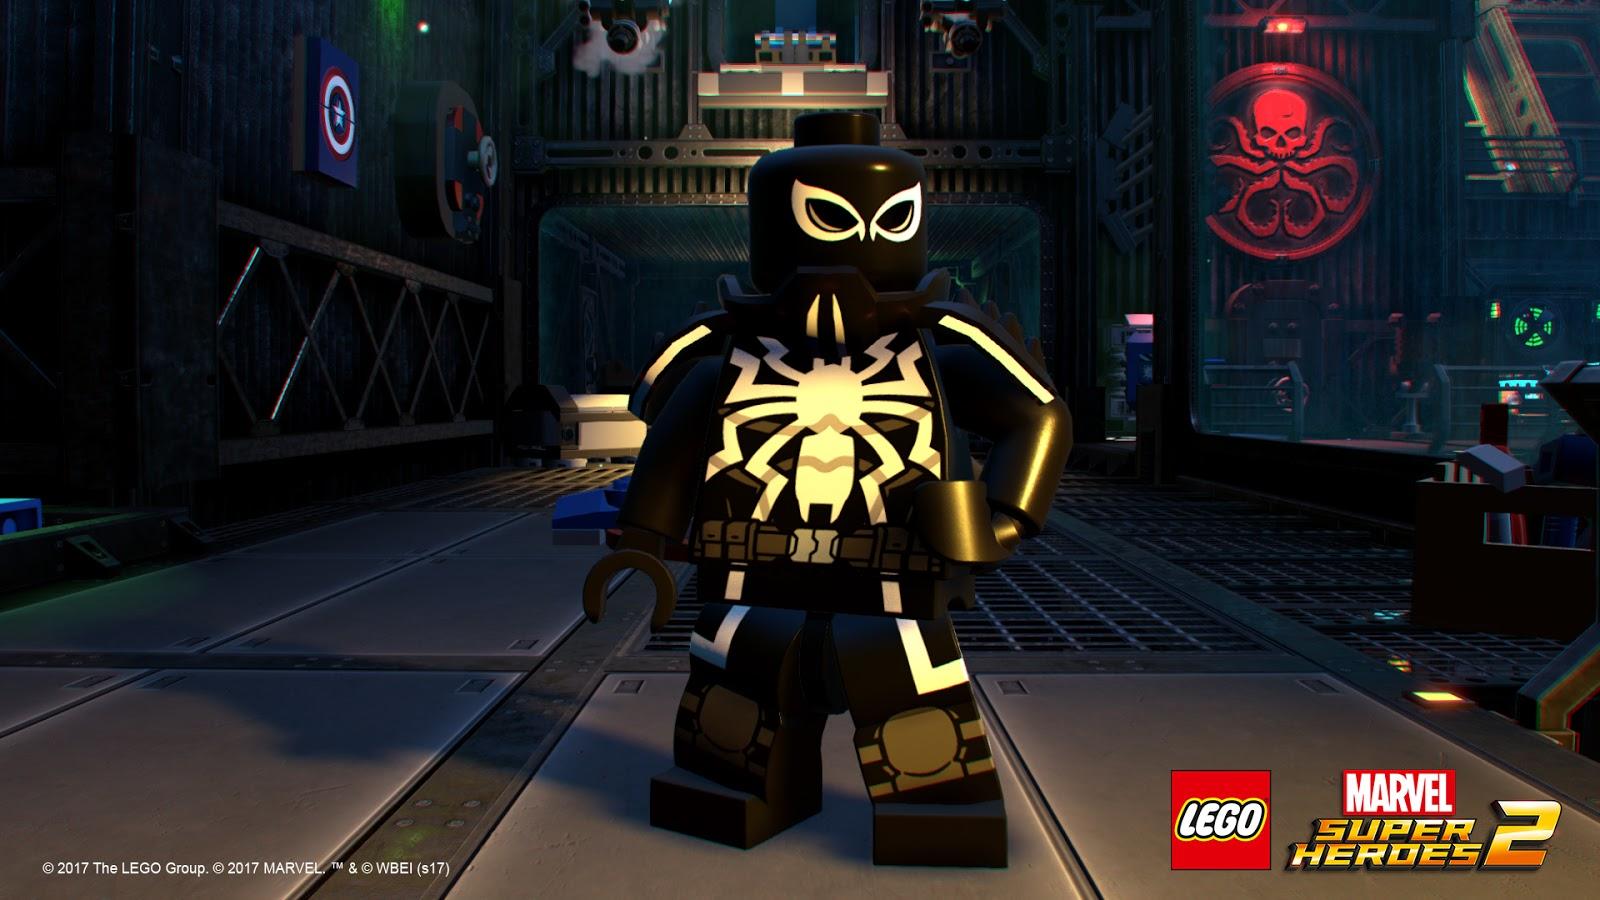 LEGO Marvel Super Heroes 2 HD Wallpaper games review, play